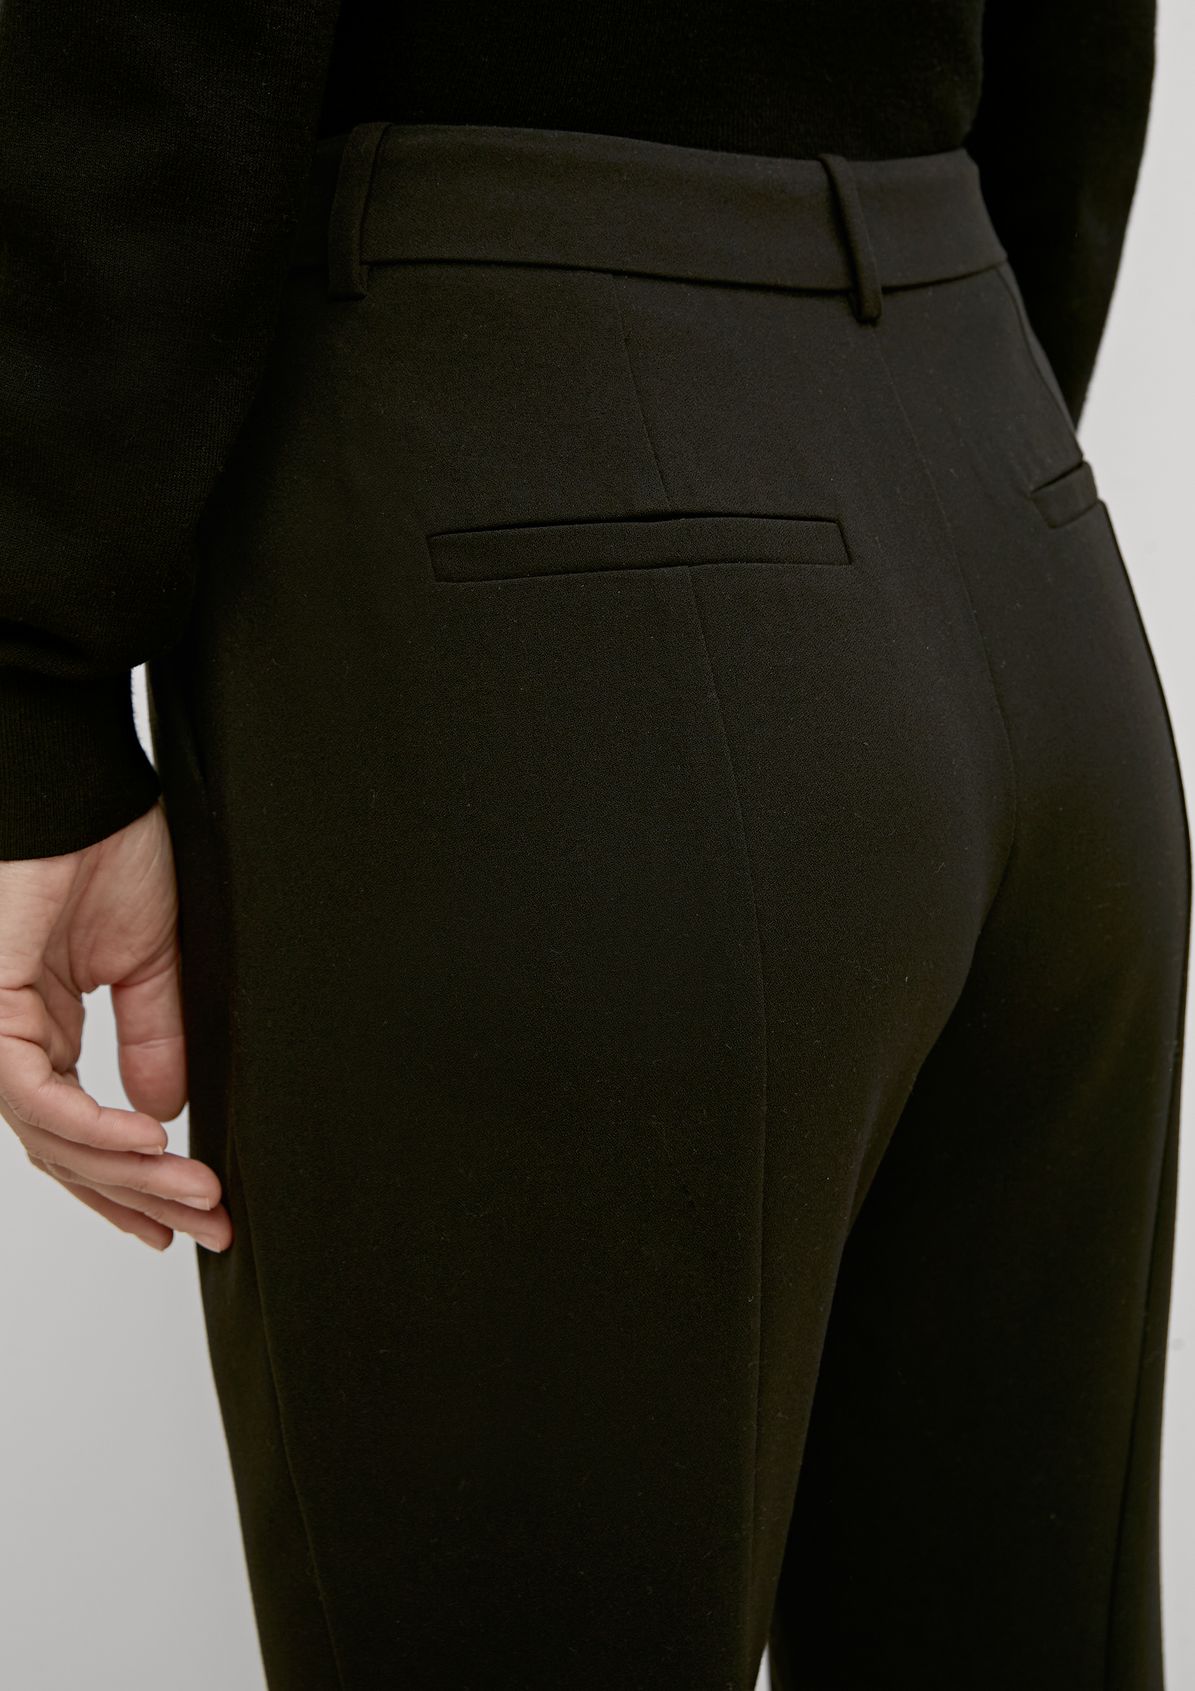 Slim fit: Trousers with a flared leg from comma